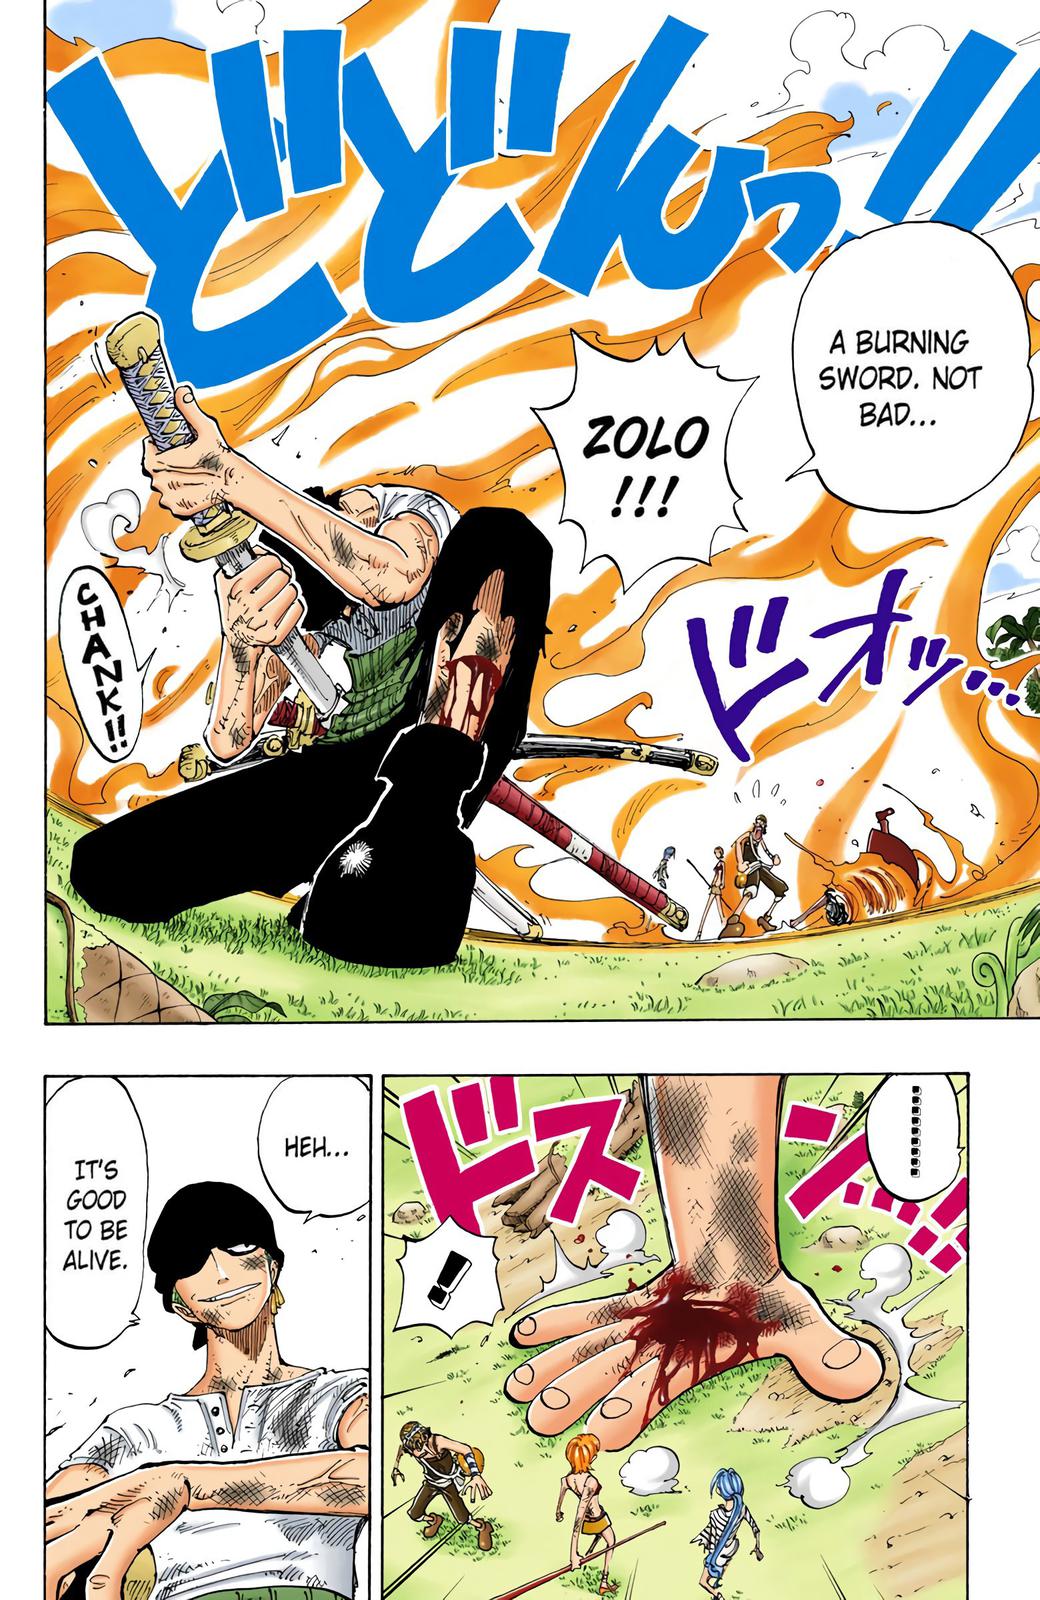 One Piece Lifting Strength Revision | VS Battles Wiki Forum